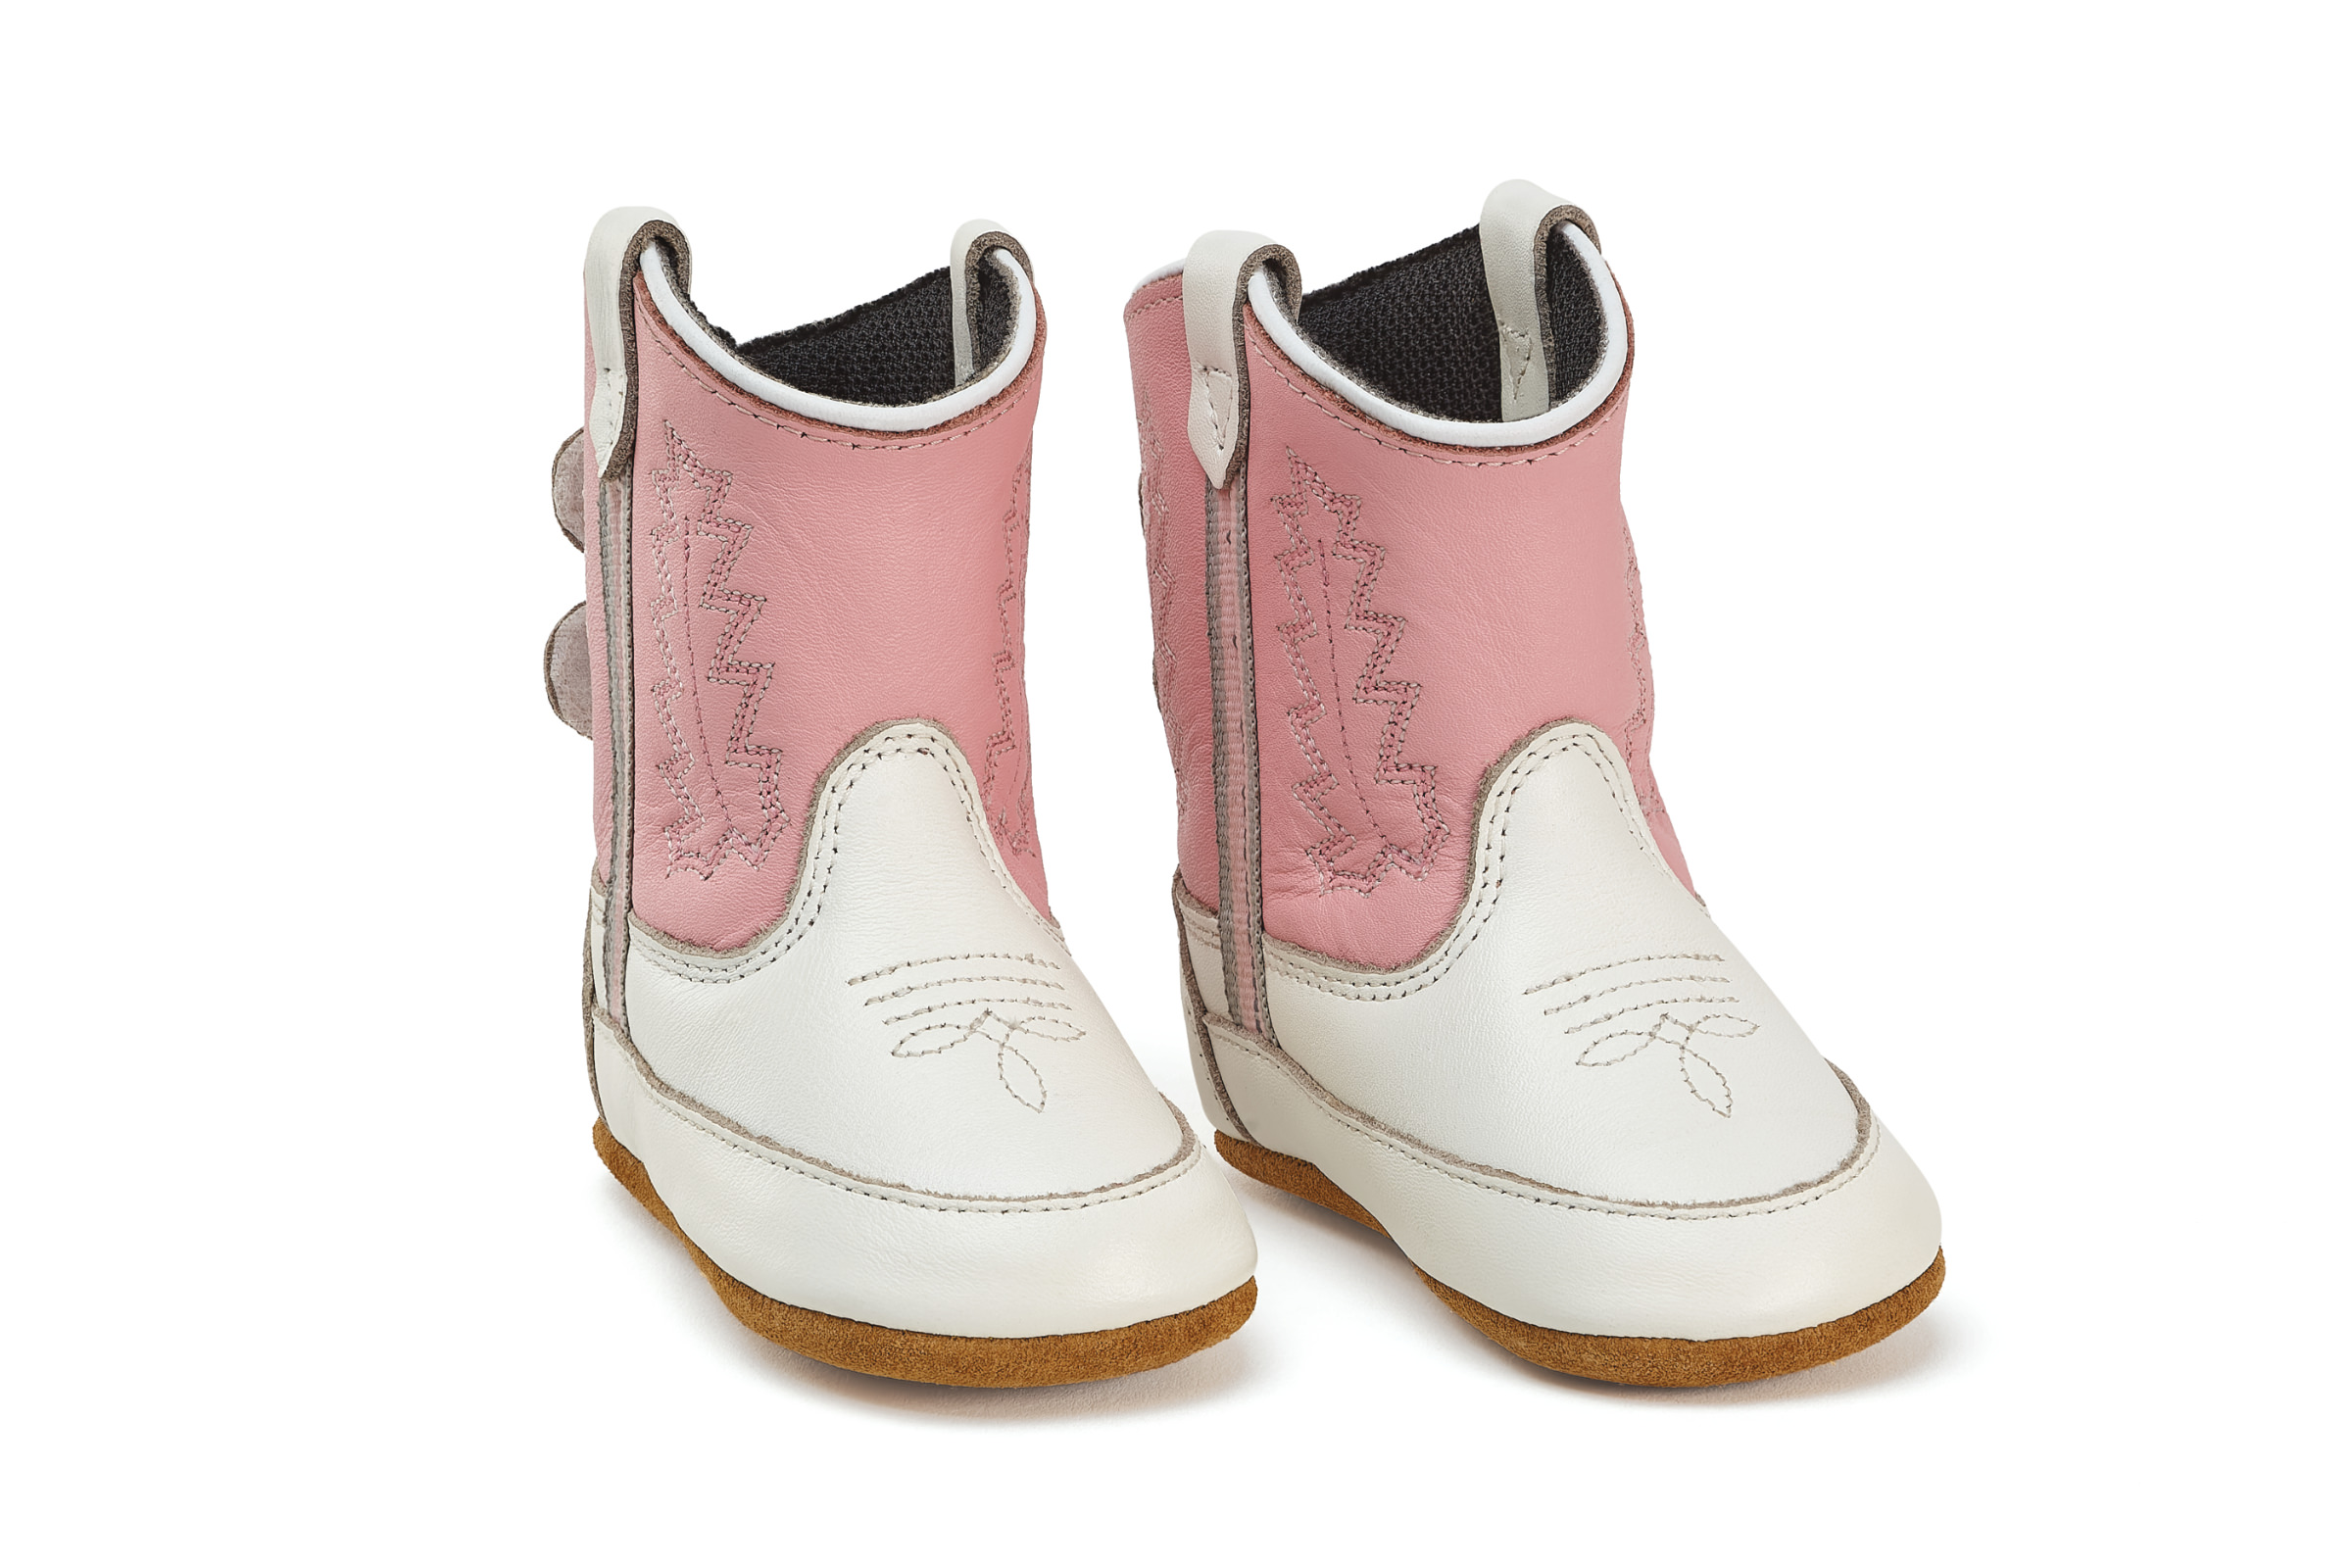 Cowboy boots for babies 10056 Daisy, white/pink